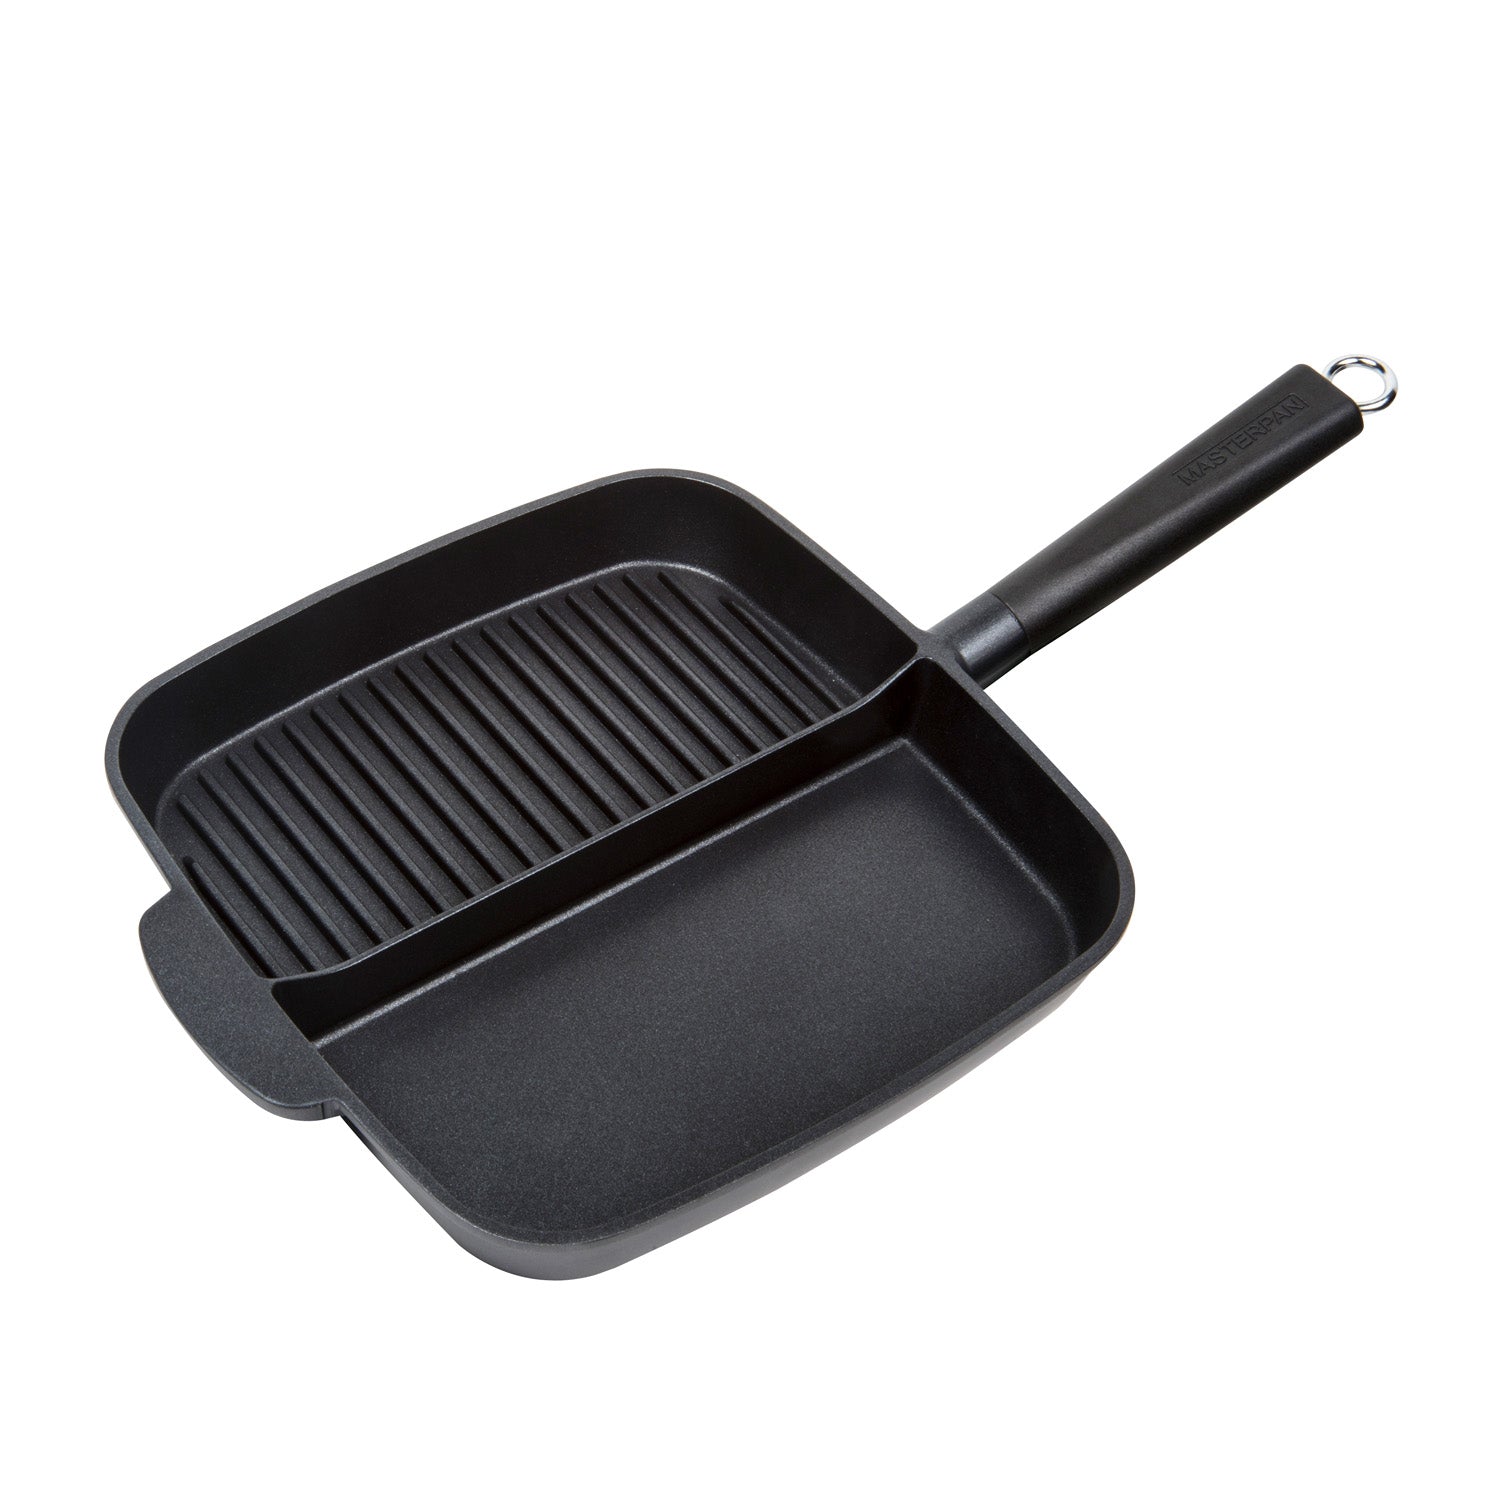  JUSTUP Nonstick Grill Pan, 3-in-1 Egg Pan 11 Inch Non Stick Skillet  Pan, Heat Resistant Handle 3 Section Skillet Pancake Pan, Divided Pan  Cooking Pan for Breakfast, Egg, Bacon and Burgers…